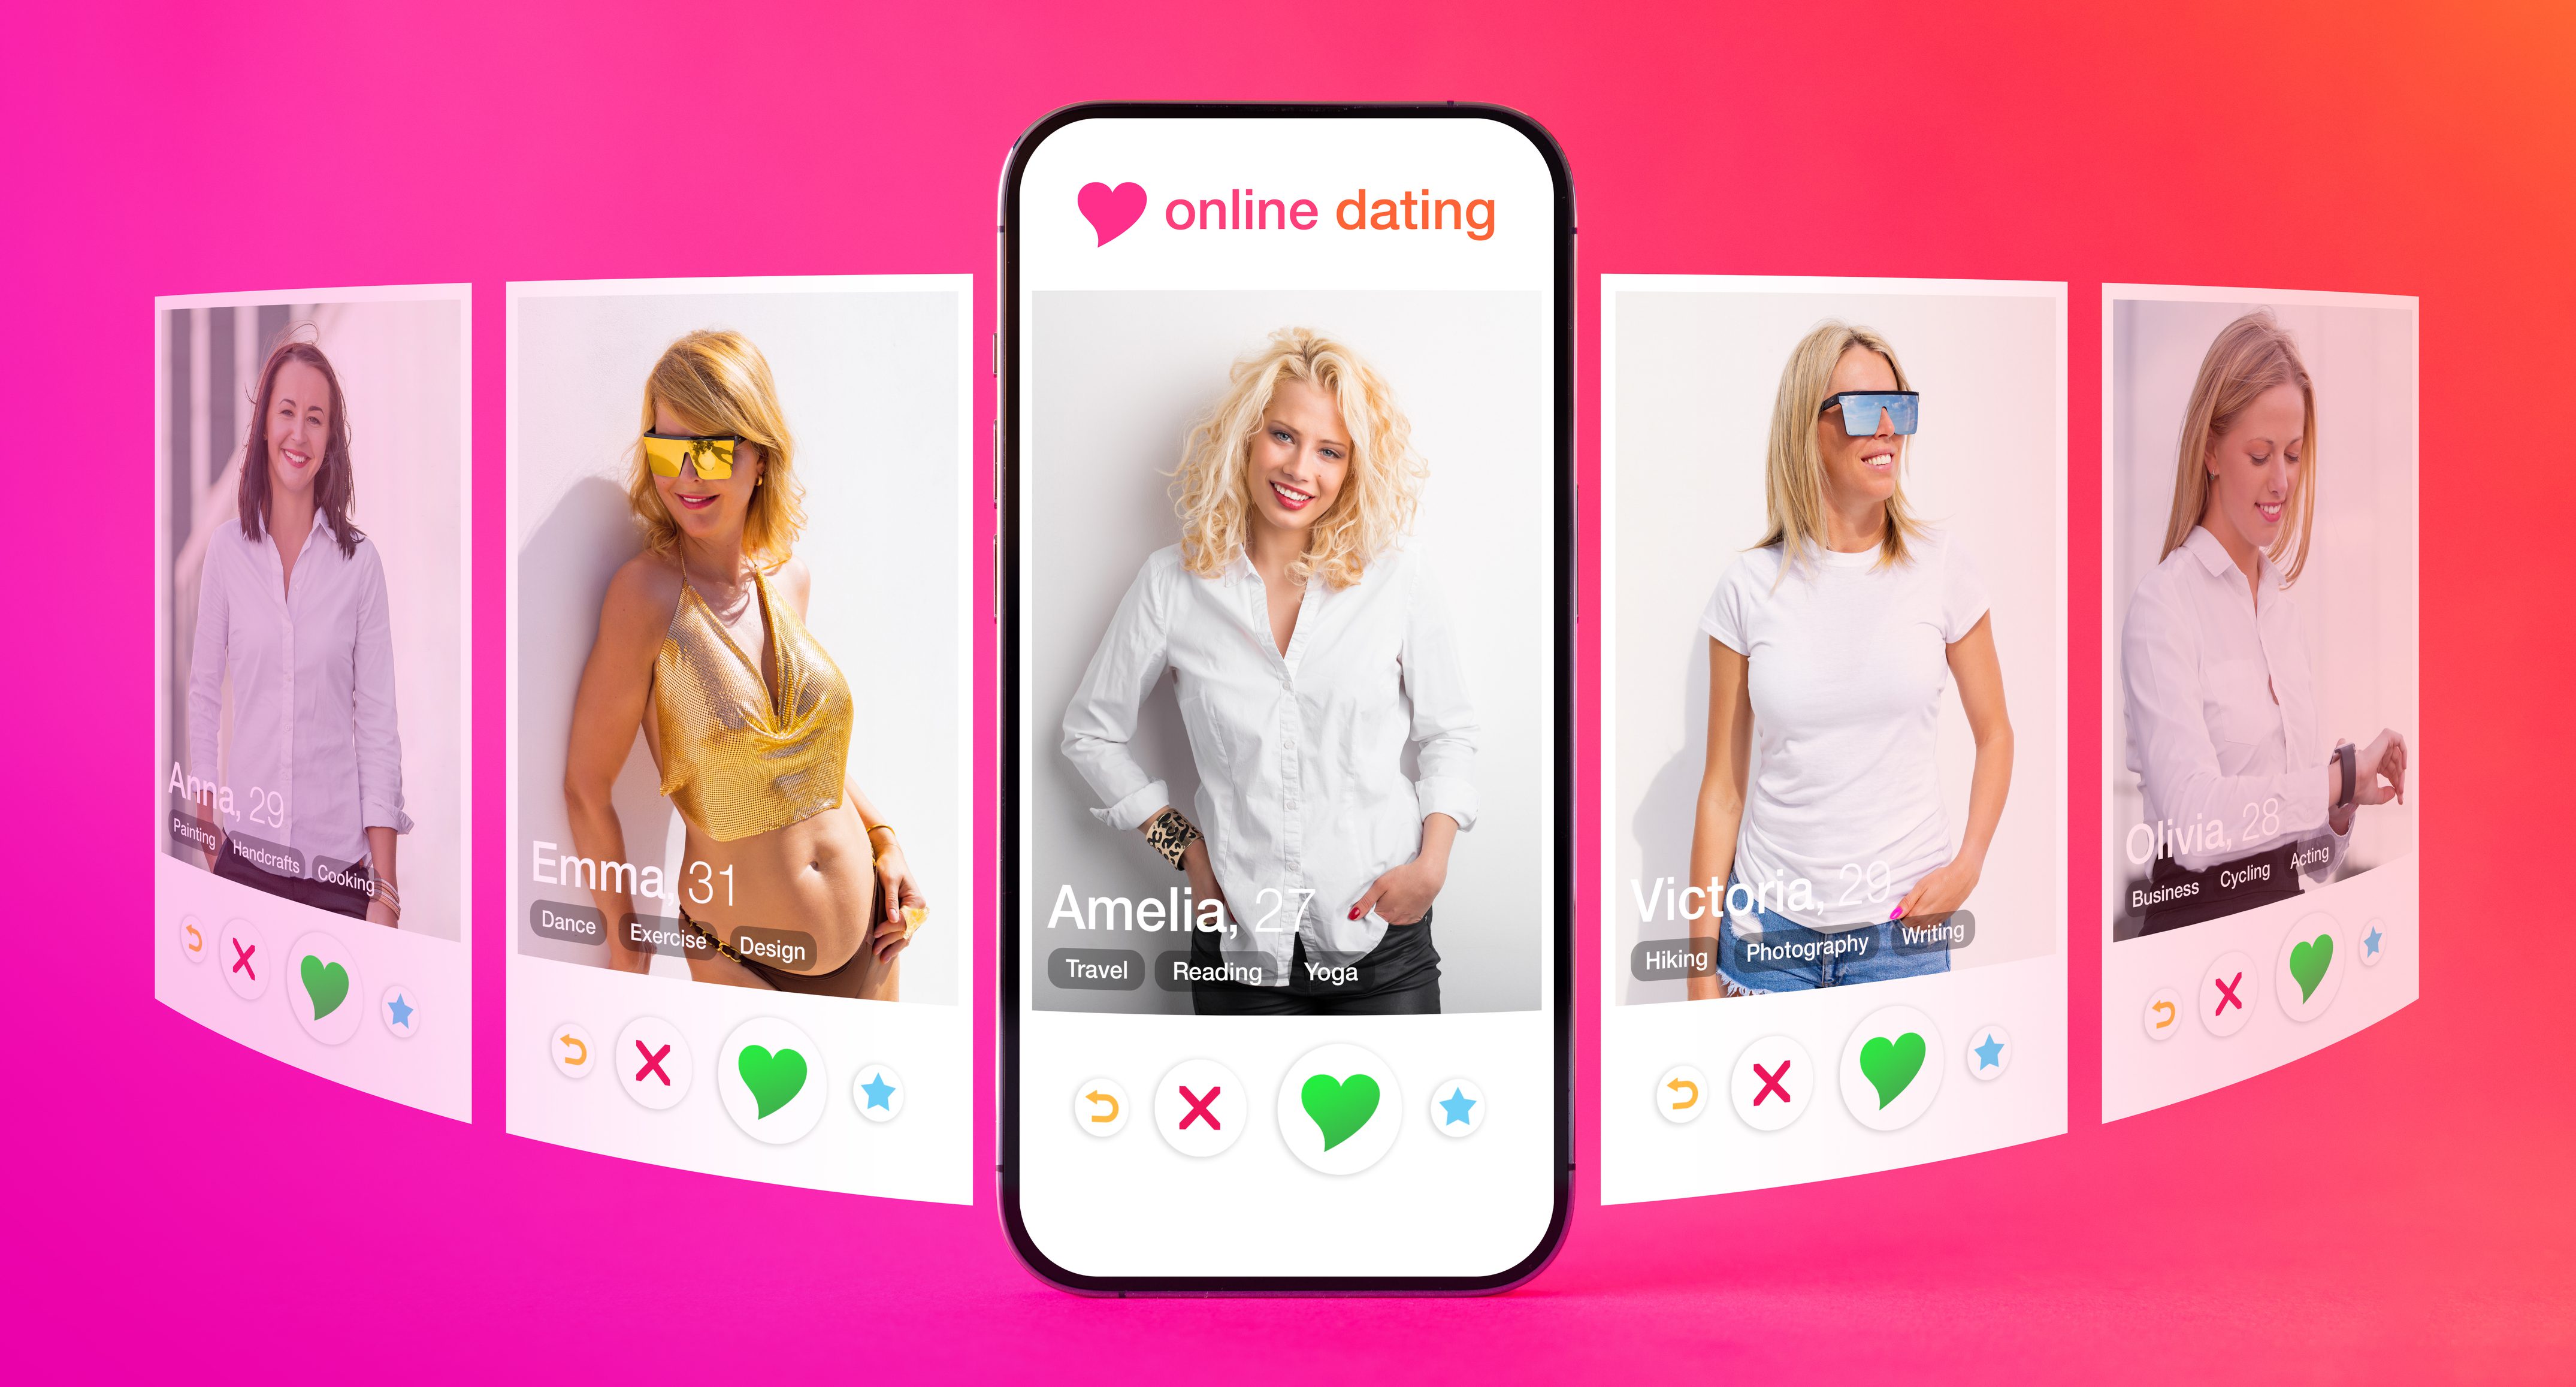 Online Dating: Do You Get Too Intimidated To Swipe Right If Someone Feels Out Of Your League?